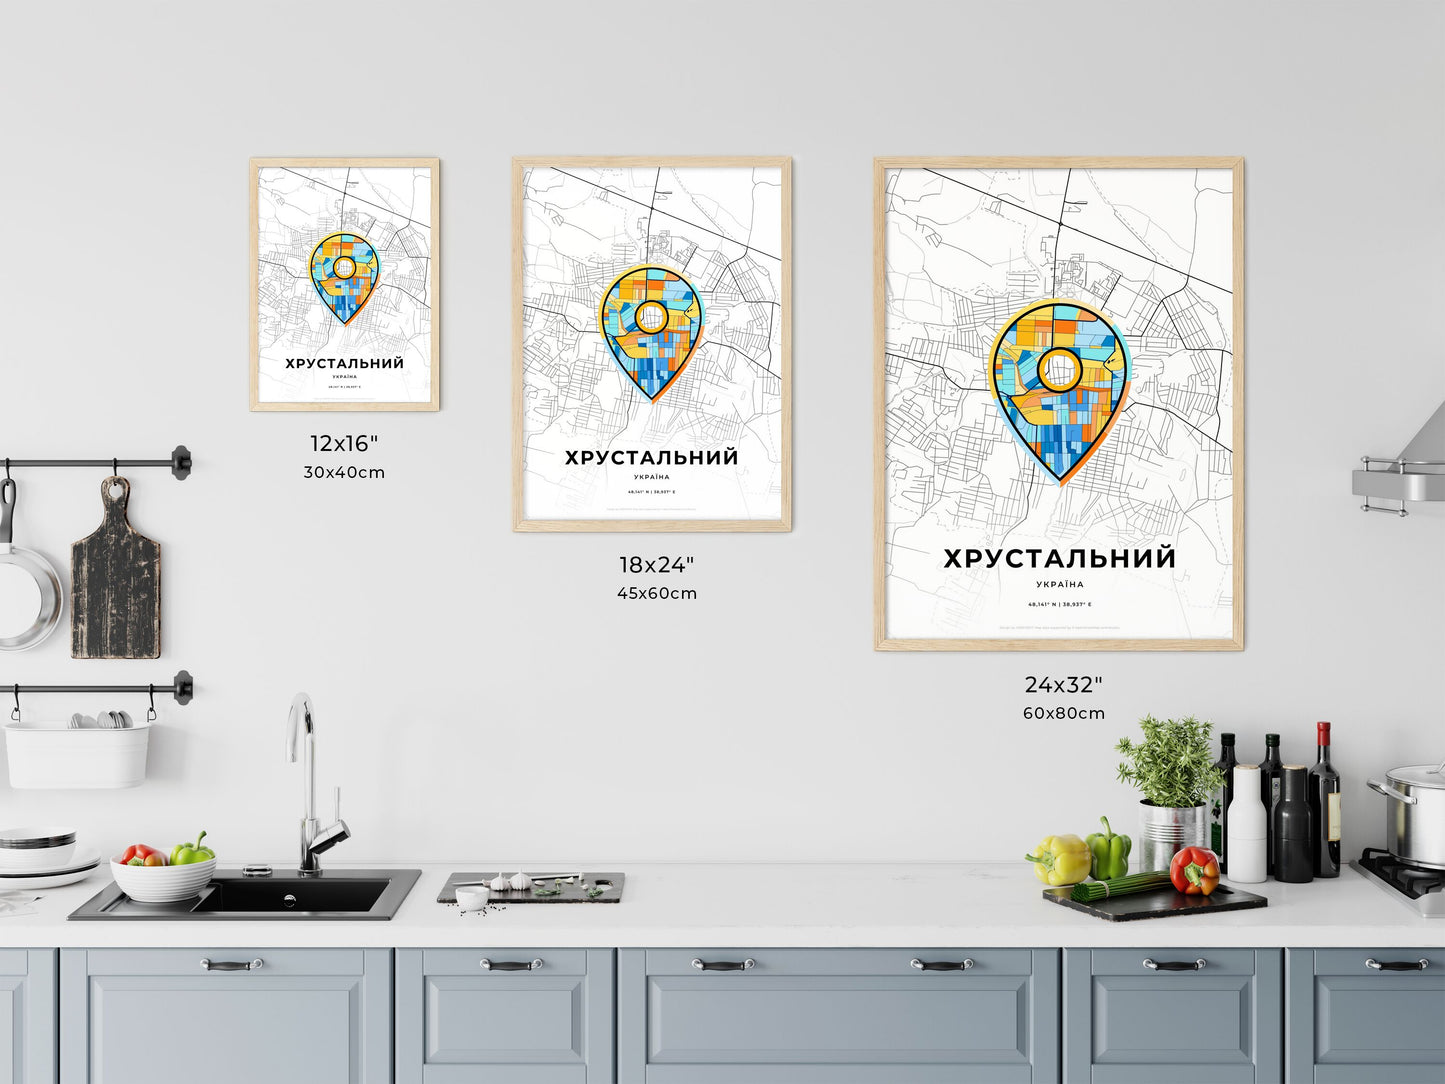 KHRUSTALNYI UKRAINE minimal art map with a colorful icon. Where it all began, Couple map gift.